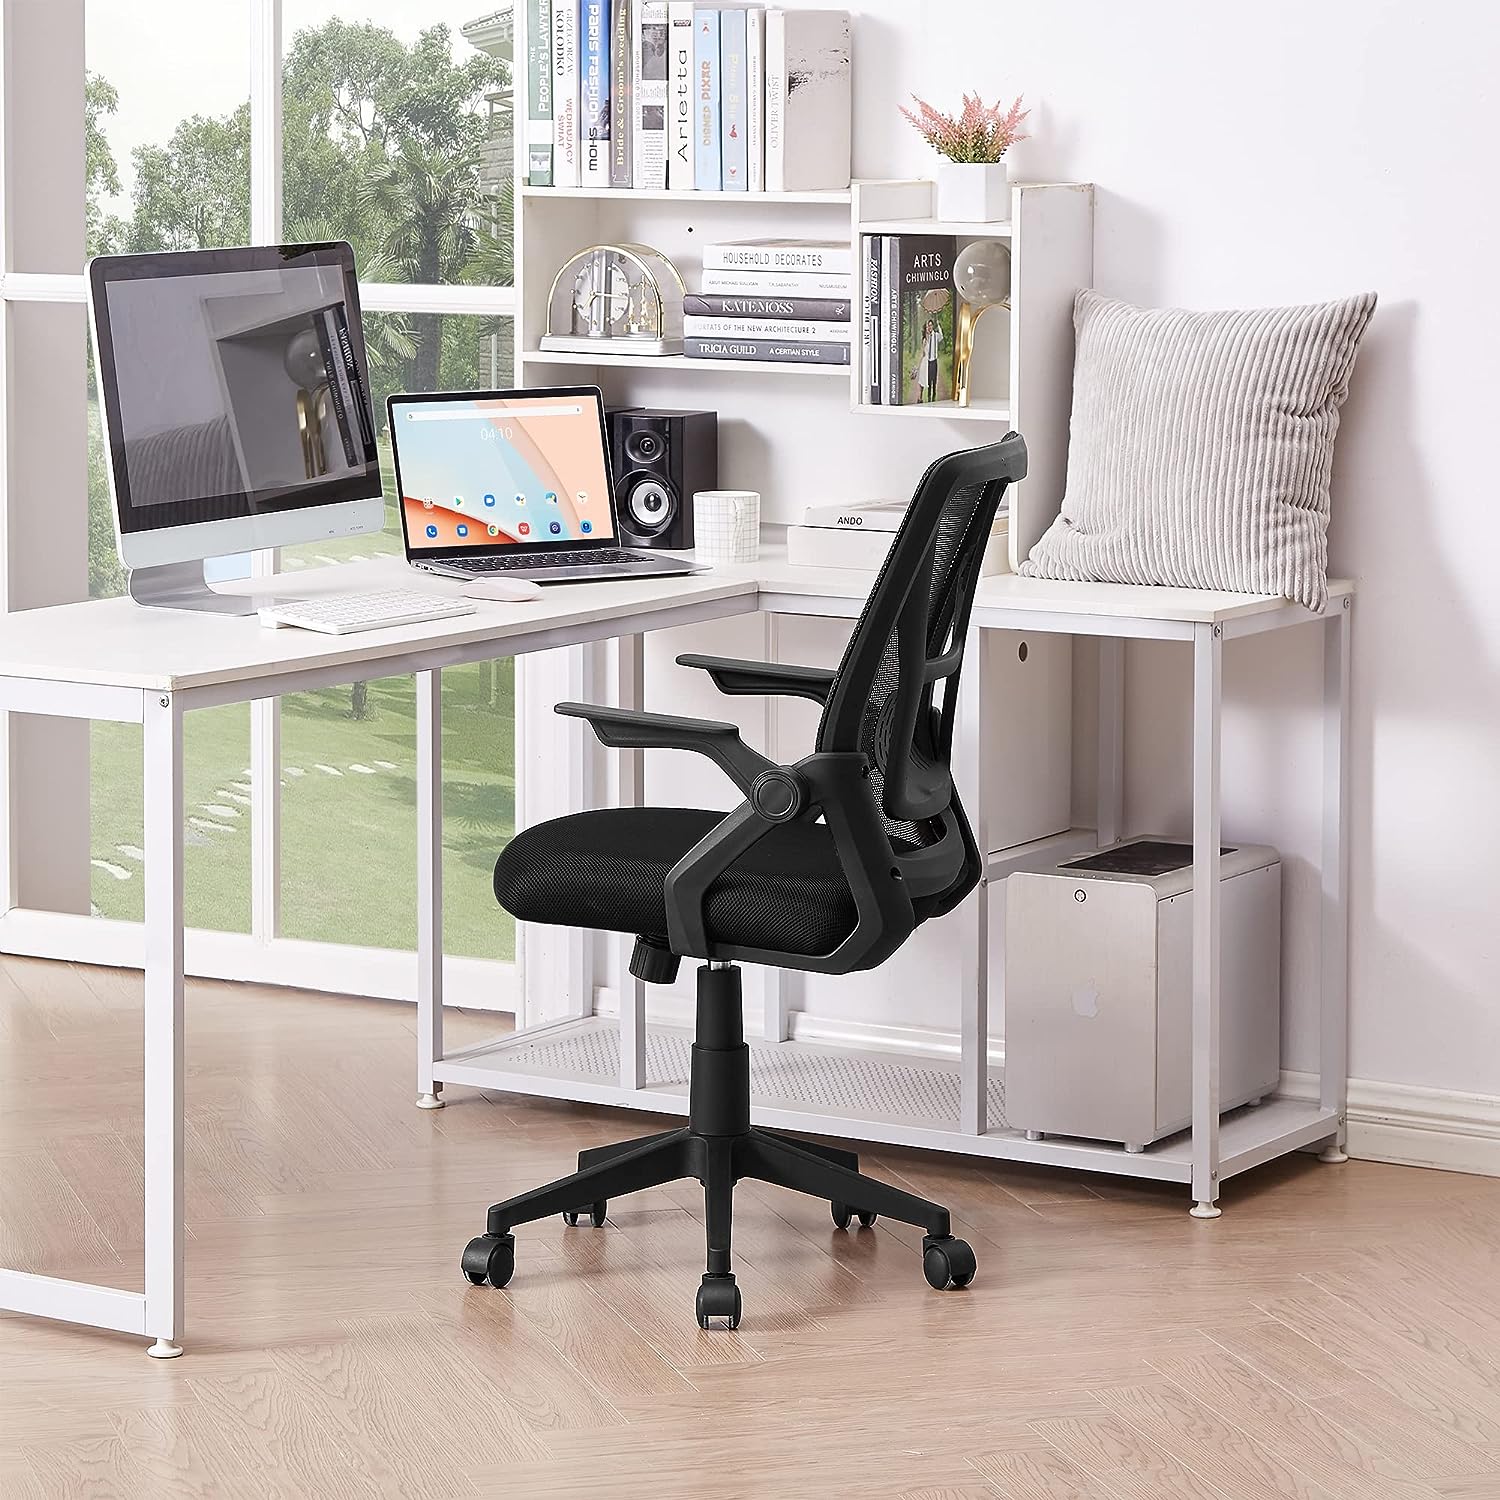 VECELO Home Office Desk Chair with Backrest for Garage Shop Workbench